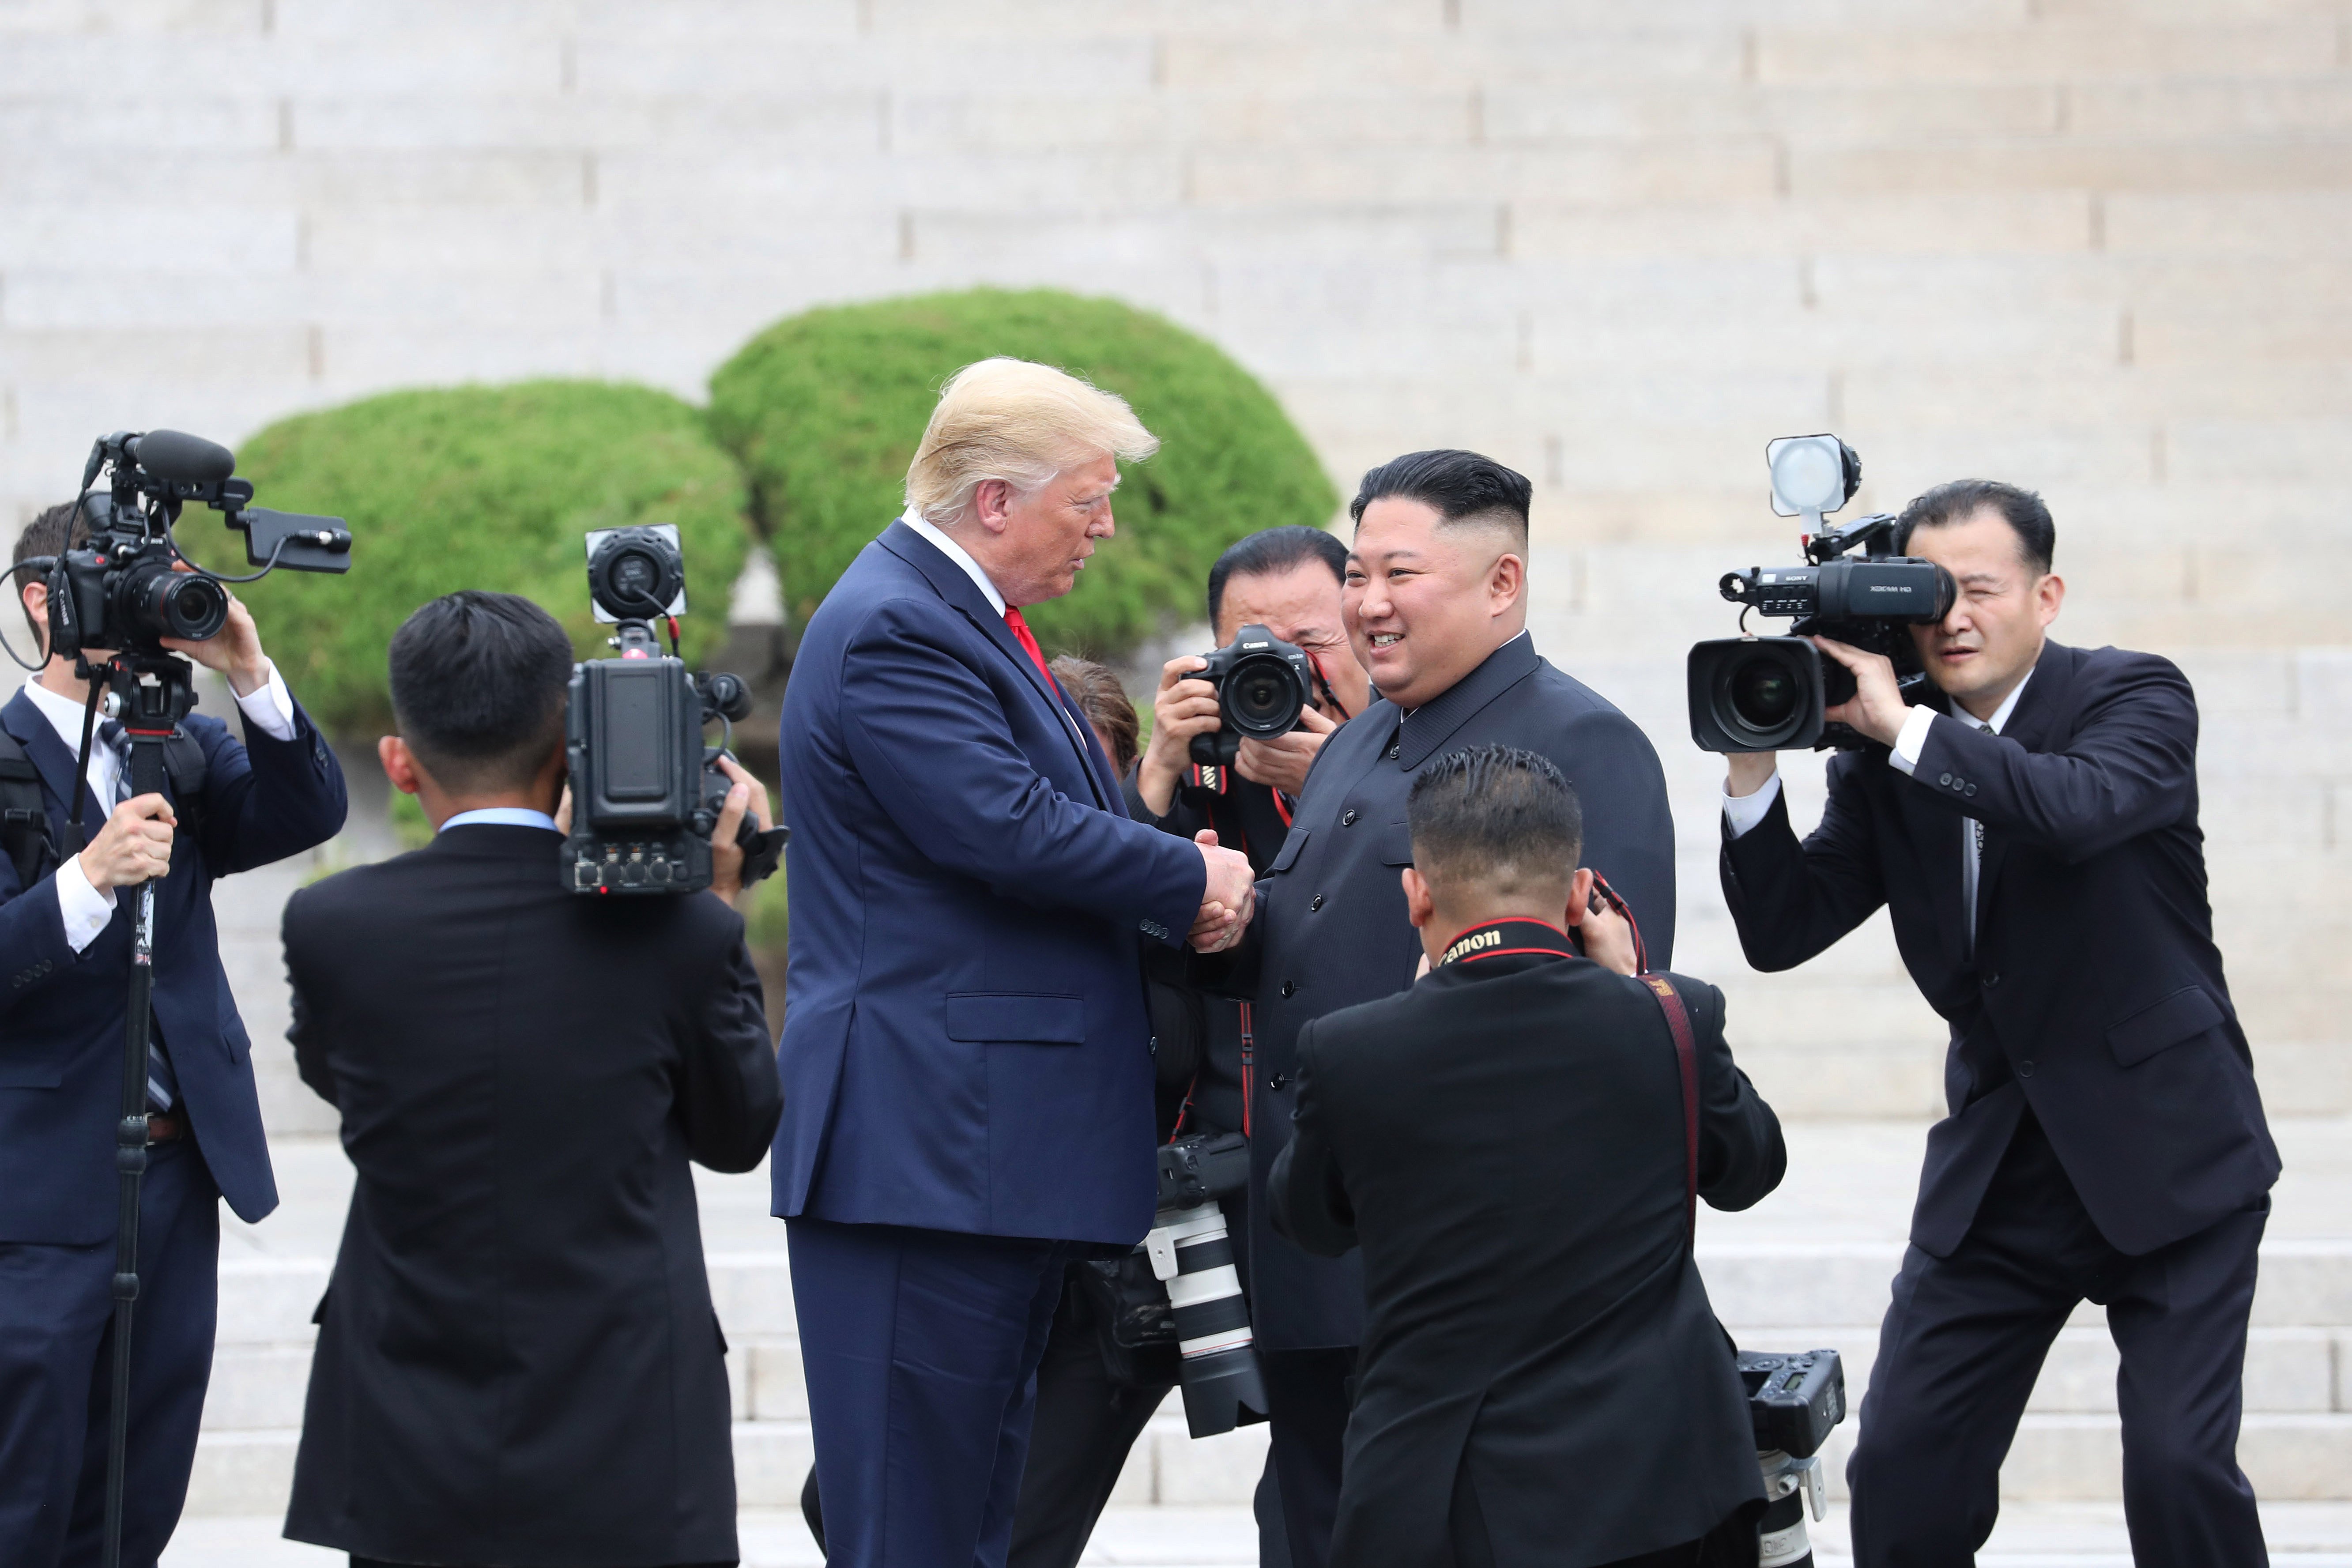 Donald Trump and Kim Jong-un shaking hands at the Korean demilitarized zone | Photo: Getty Images